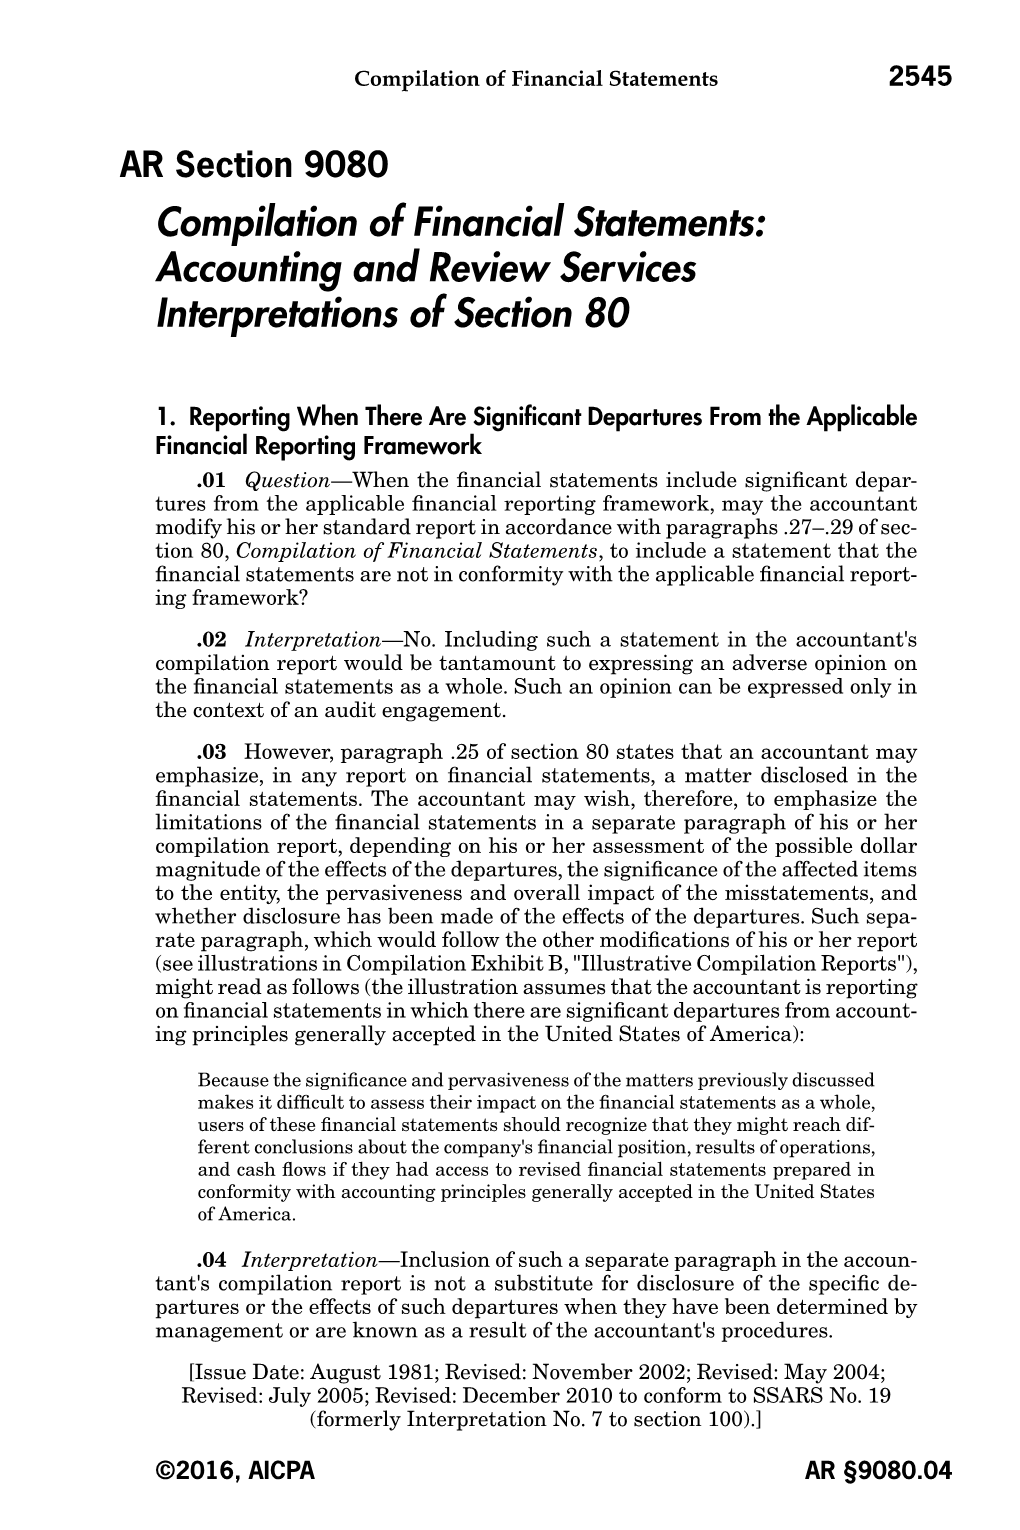 Compilation of Financial Statements: Accounting and Review Services Interpretations of Section 80